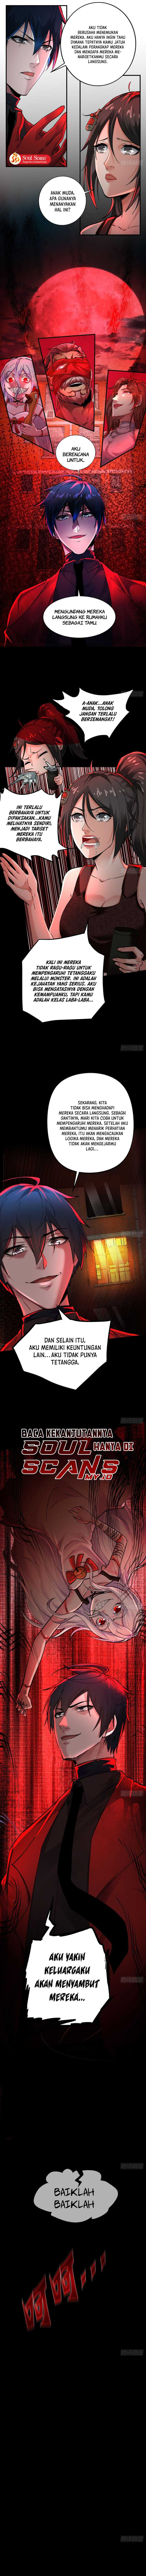 Since The Red Moon Appeared (Hongyue Start) Chapter 82